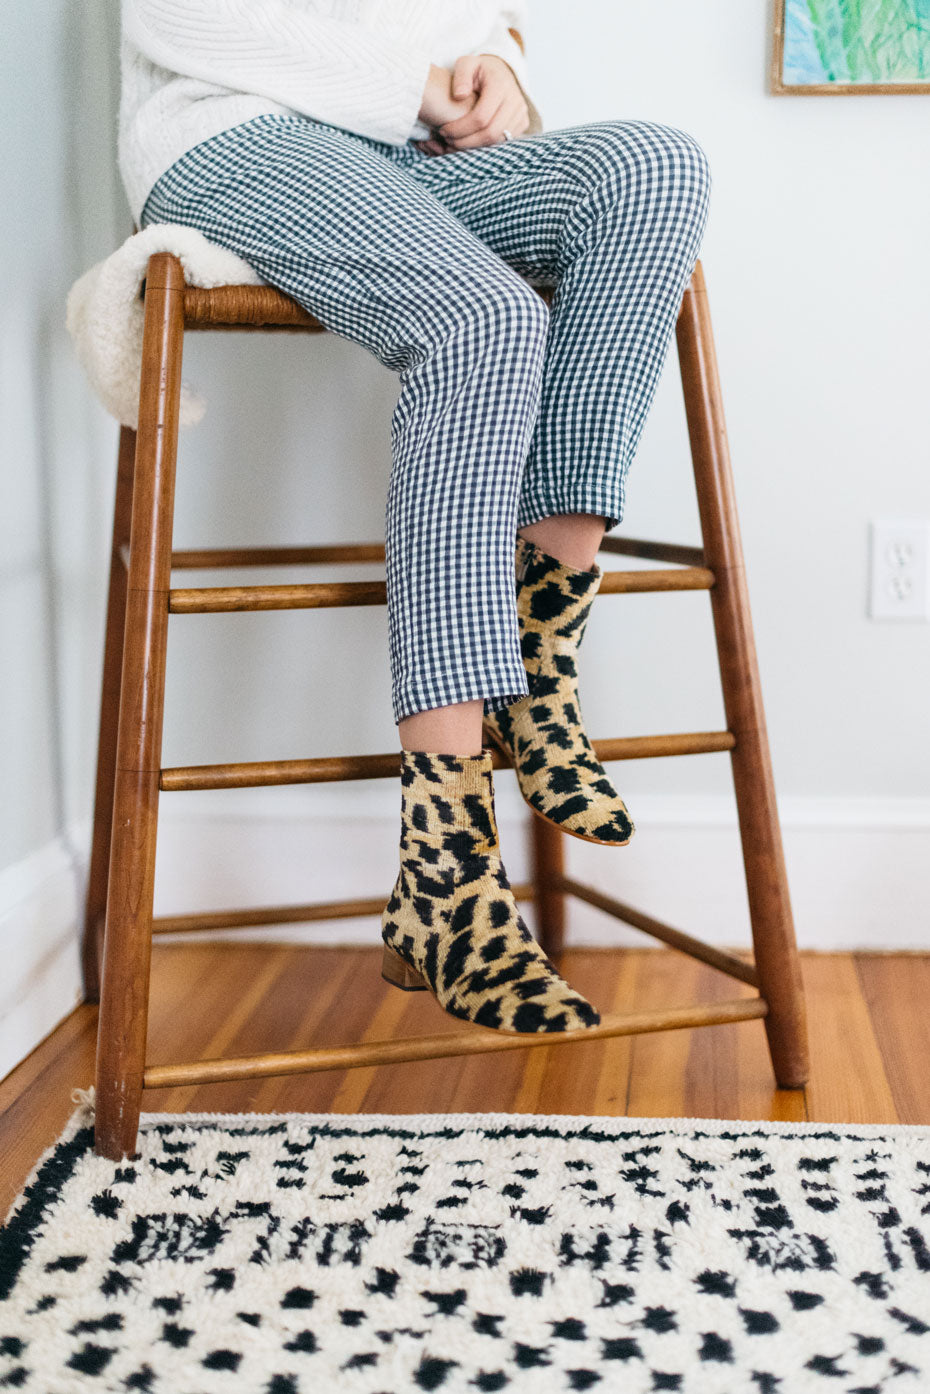 Our leopard print velvet boot worn by Milicent Armstrong.